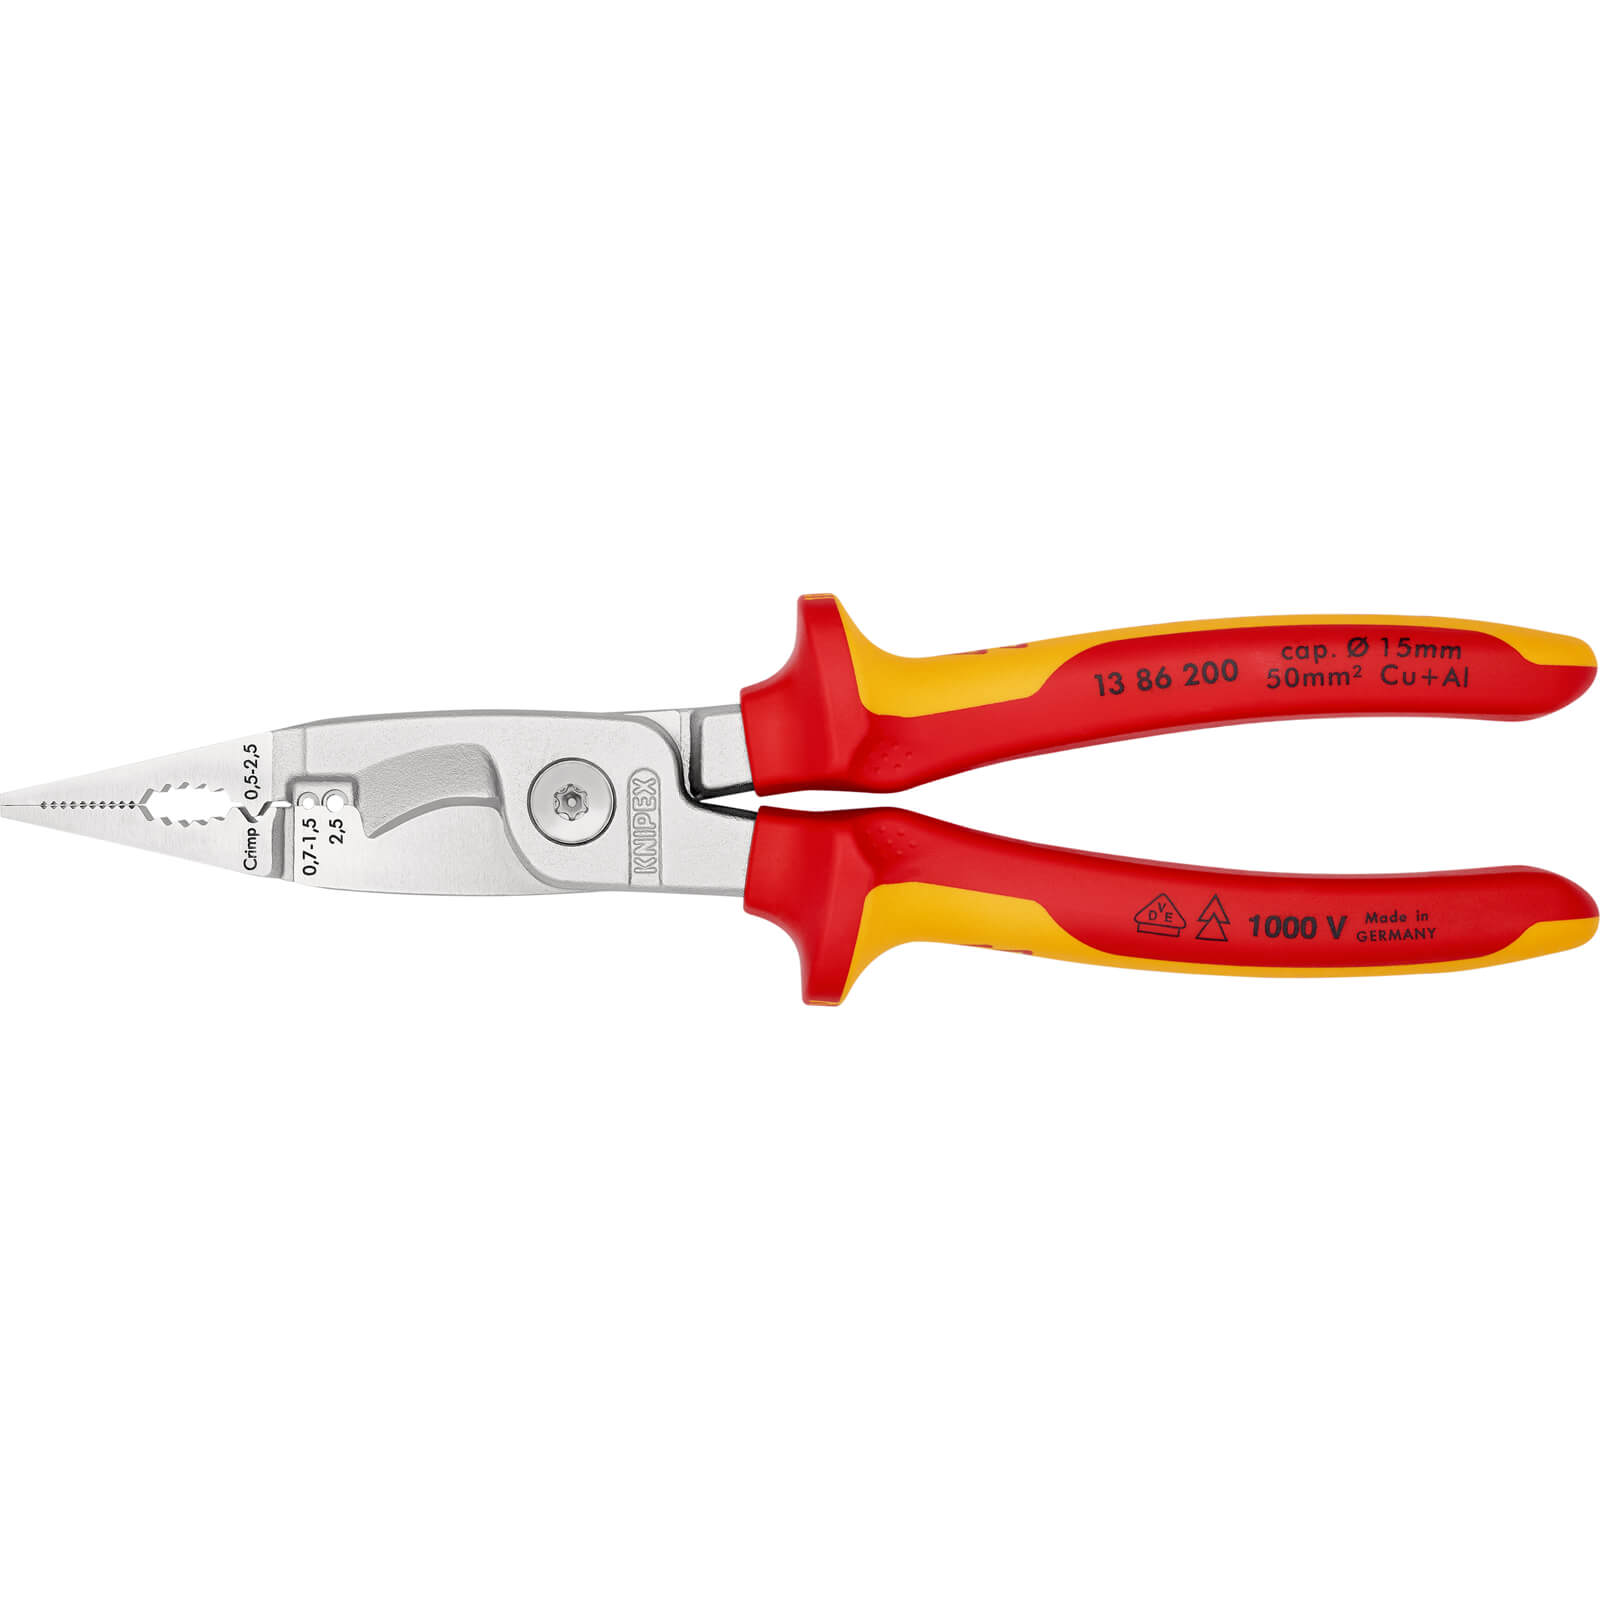 Image of Knipex 13 86 VDE Insulated Electrical Installation Pliers 200mm